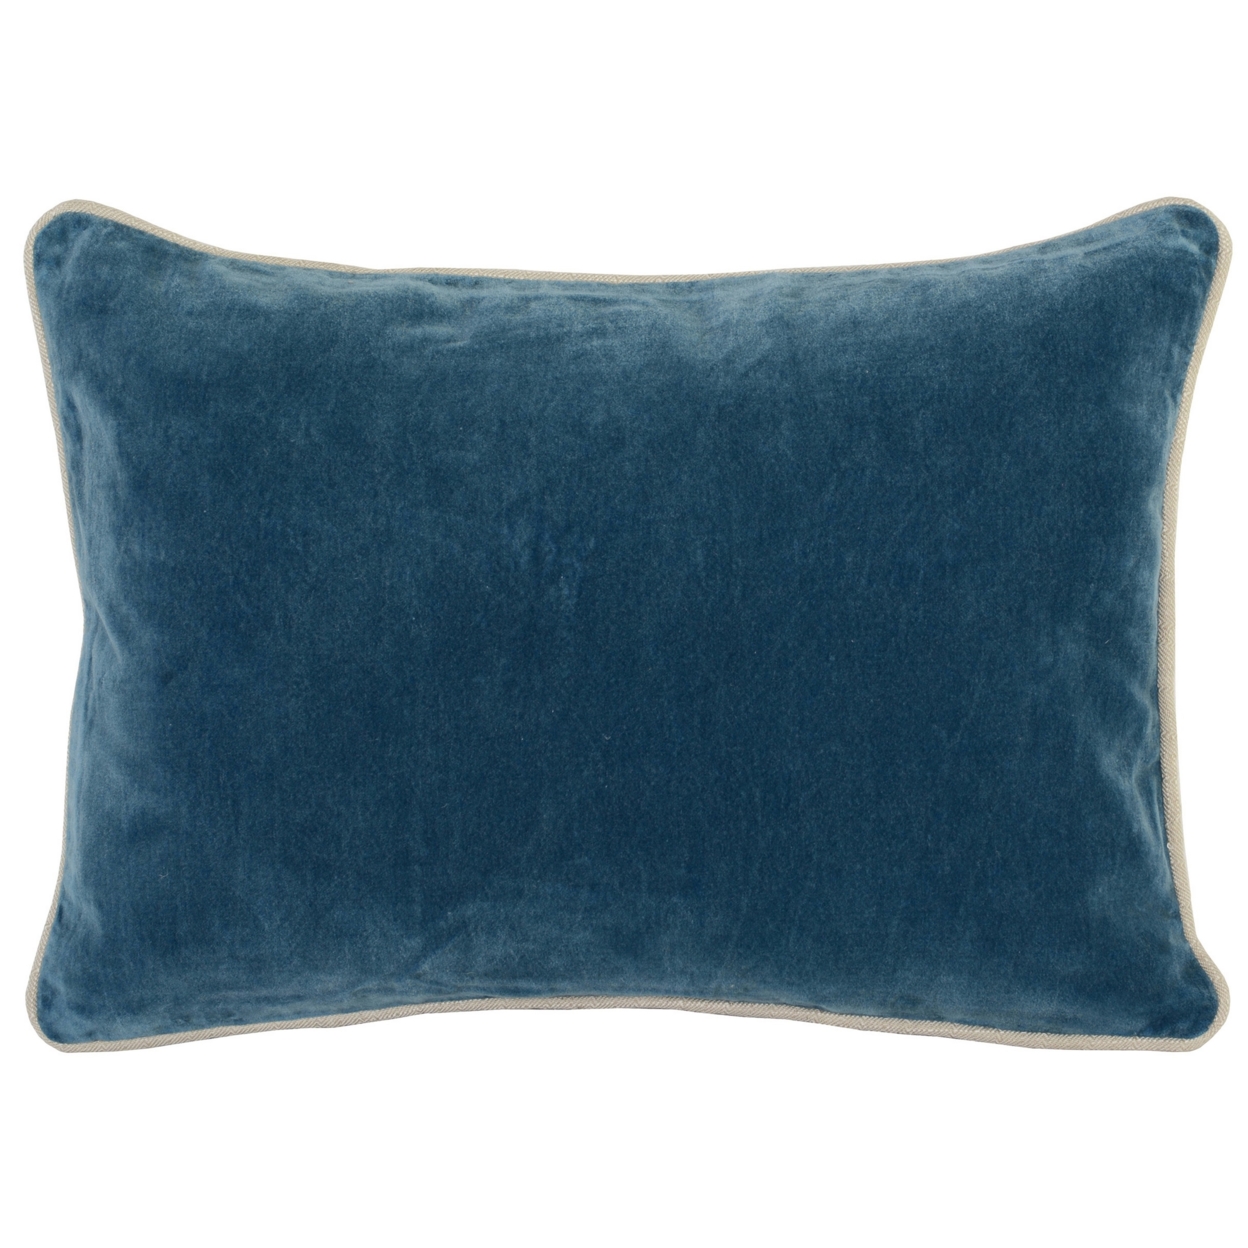 Rectangular Fabric Throw Pillow With Solid Color And Piped Edges, Blue- Saltoro Sherpi